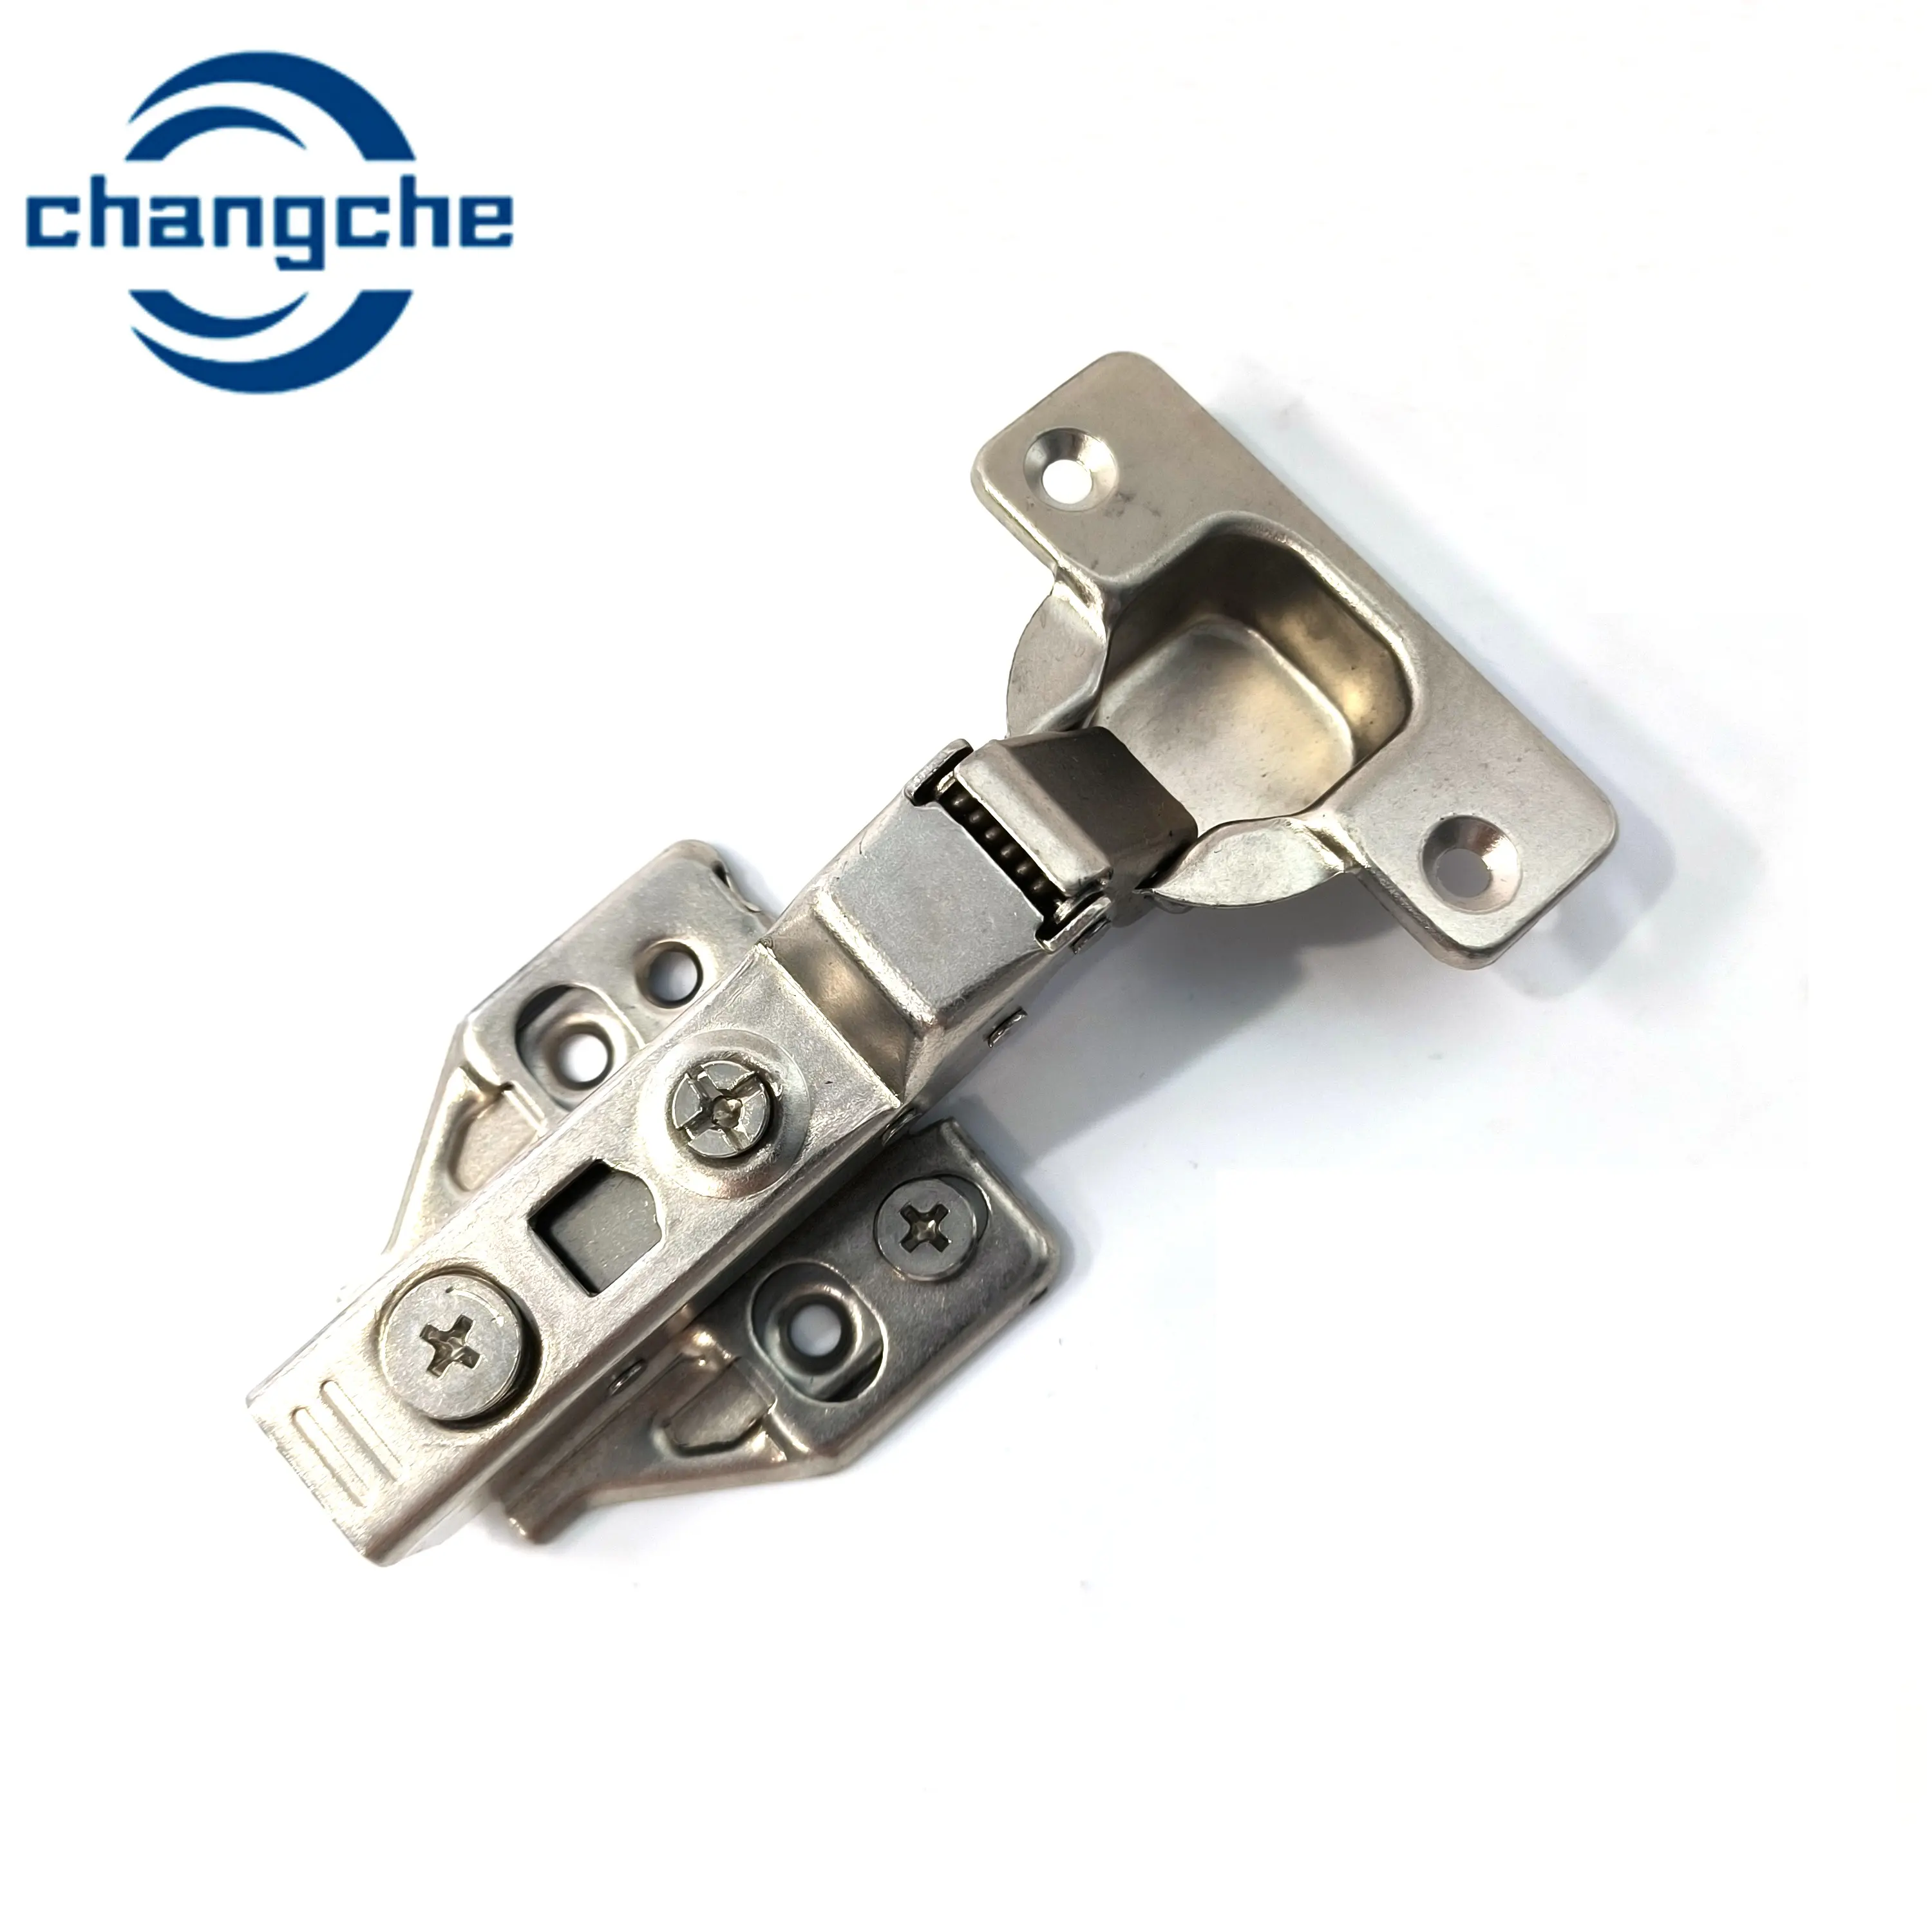 Cabinet Stainless Steel Opening Silent Hinge Hydraulic Soft Close Hinges For Cabinets Furniture Hardware Hinge